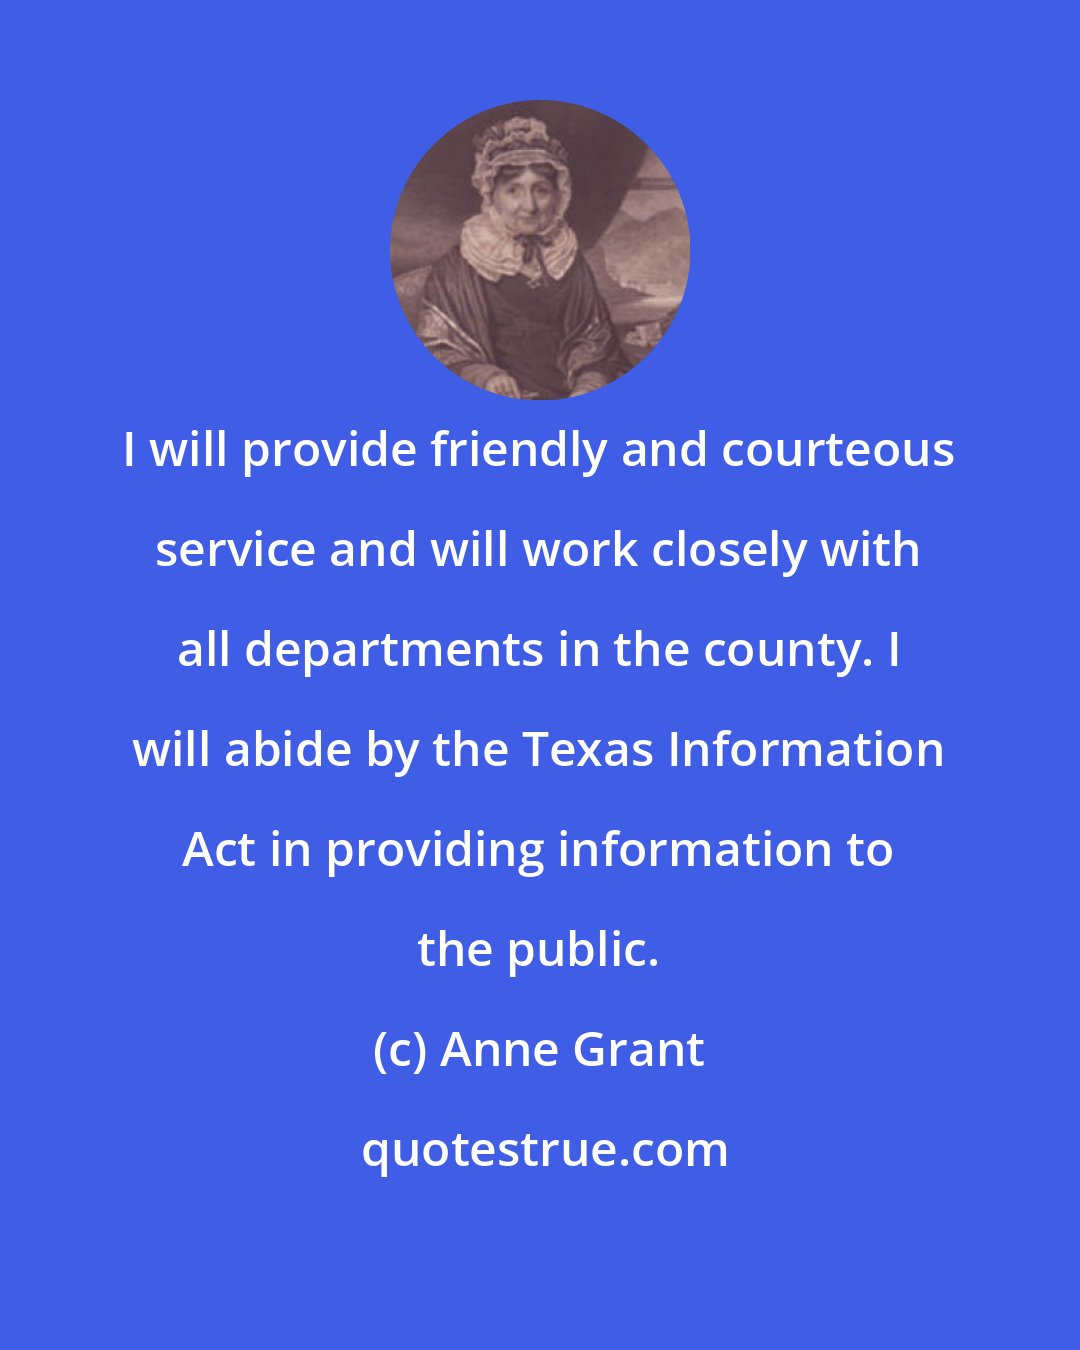 Anne Grant: I will provide friendly and courteous service and will work closely with all departments in the county. I will abide by the Texas Information Act in providing information to the public.